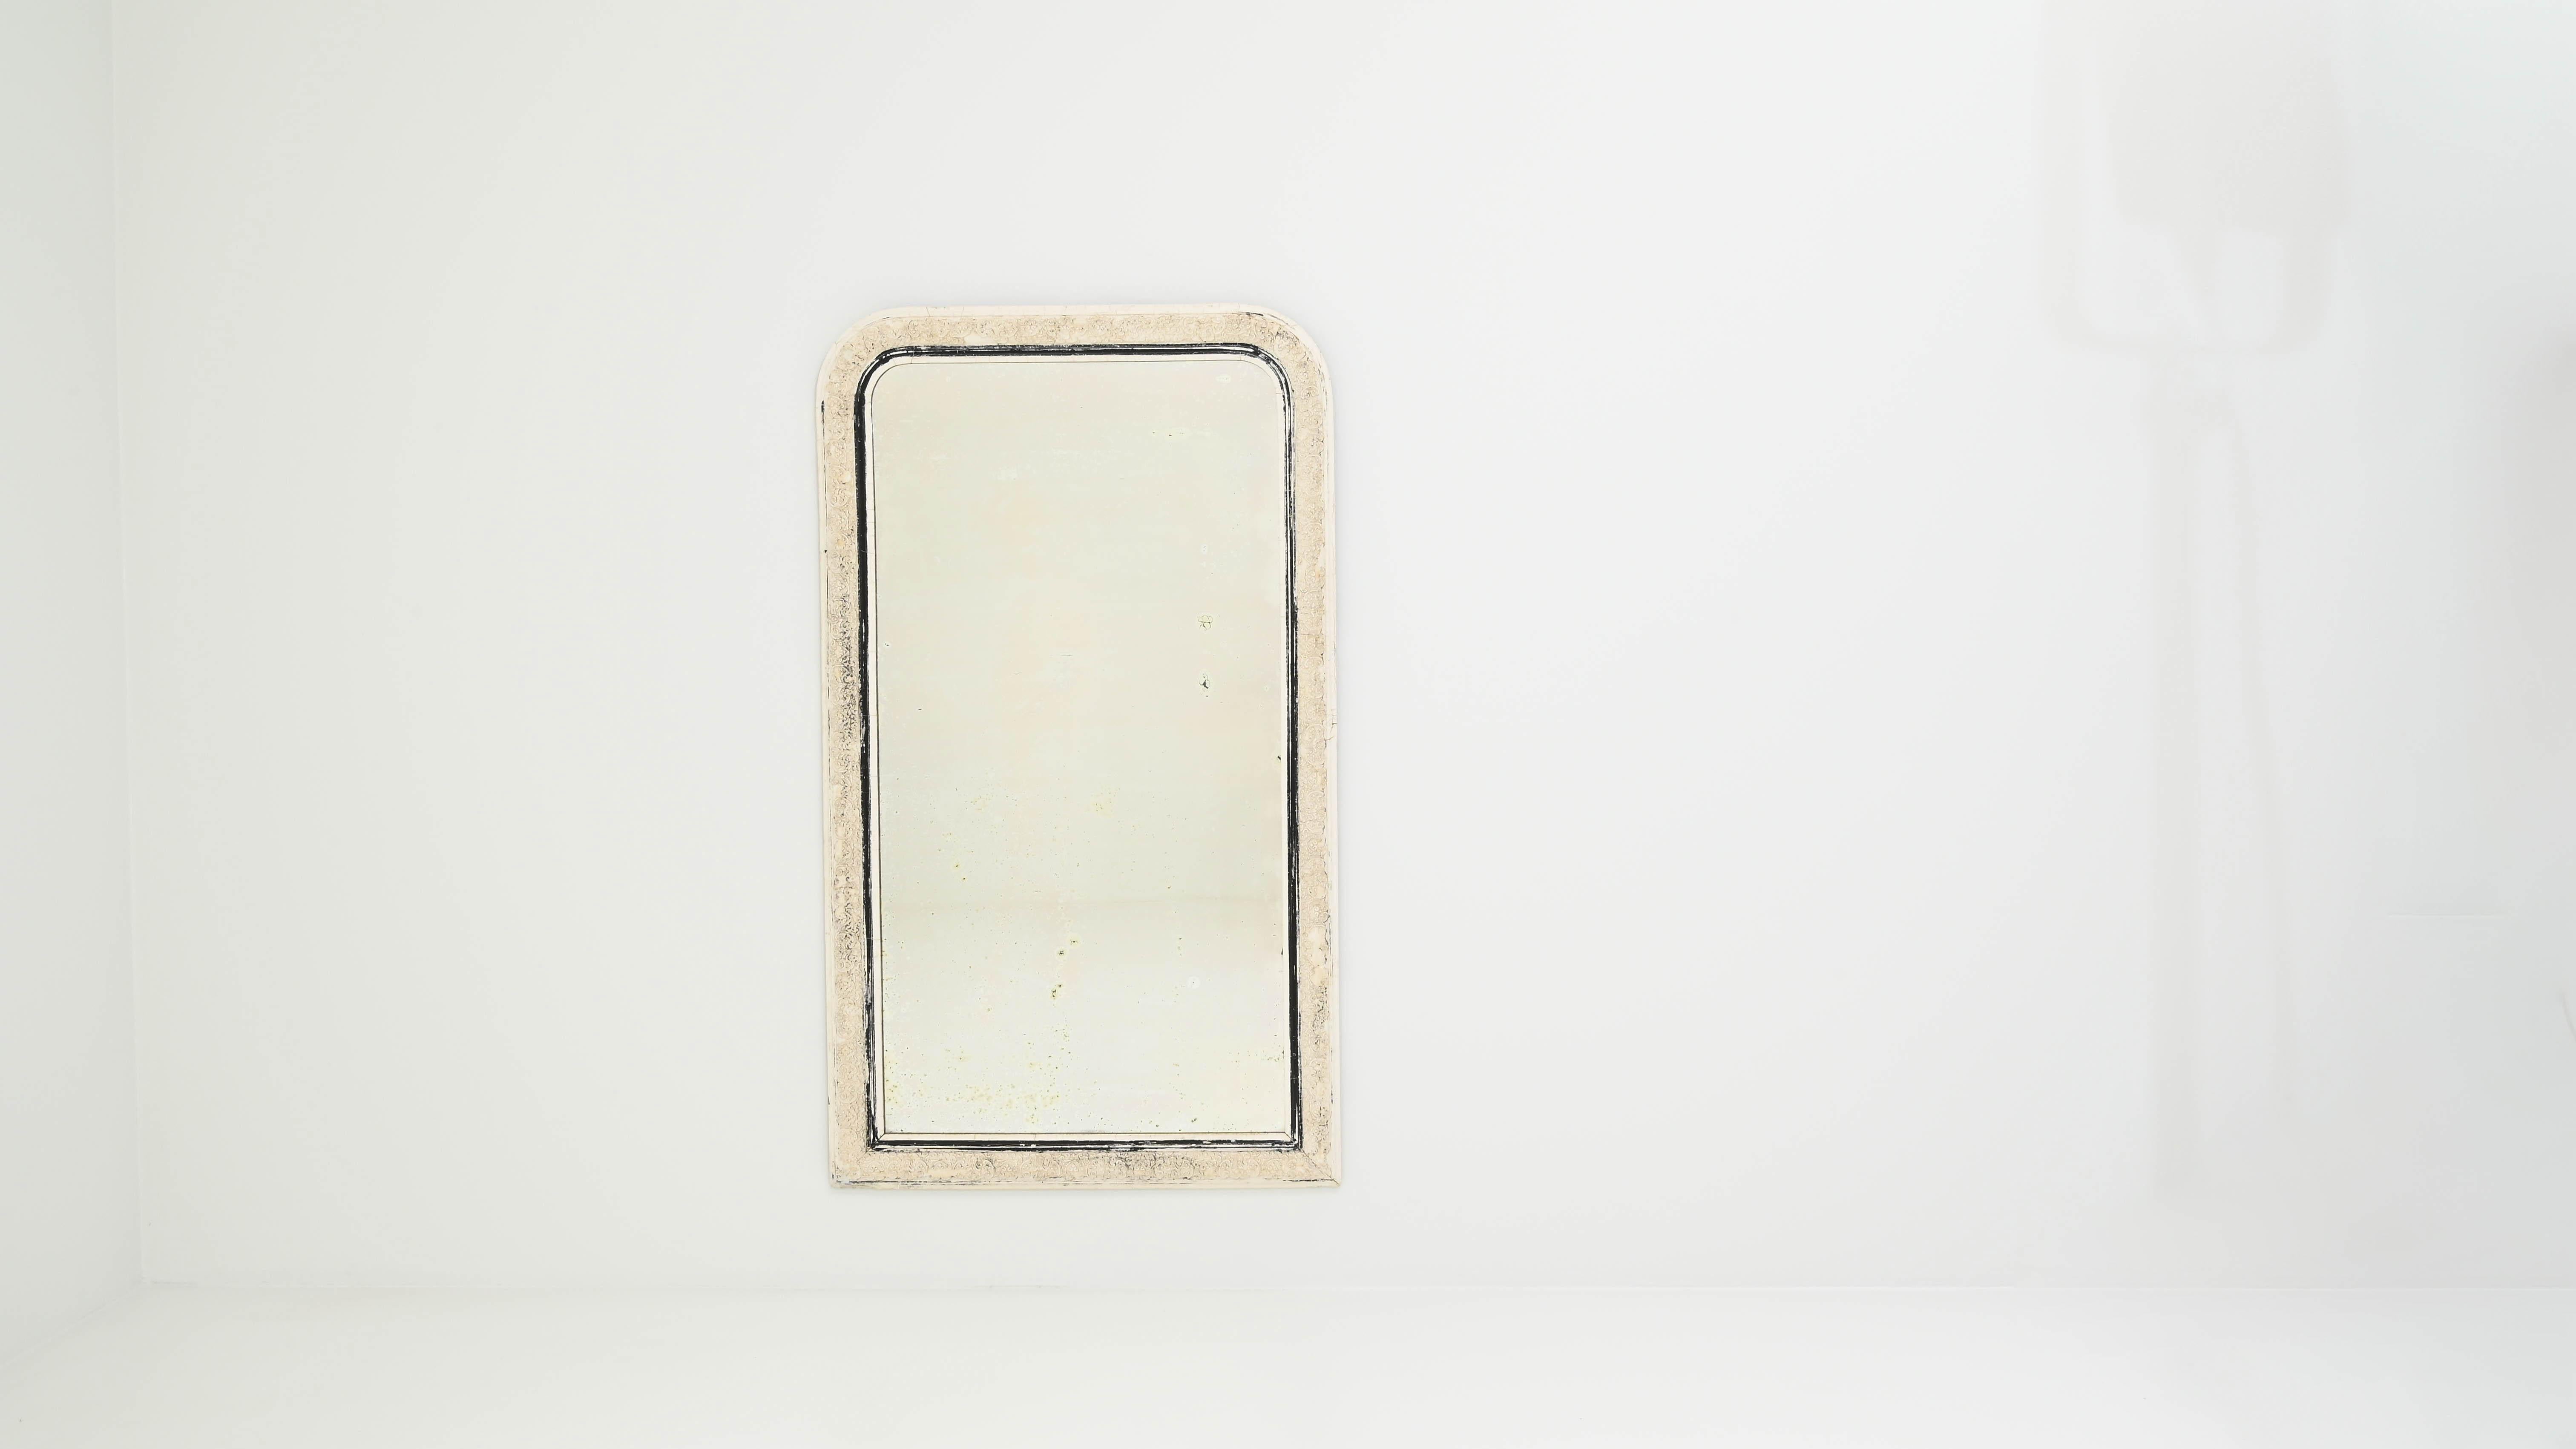 The delicate white patina of this 19th-century French mirror complements the softly-rounded upper corners, enhancing the graceful appeal of meticulous foliate patterns carved on the frame. The angular bottom corners create a captivating contrast,